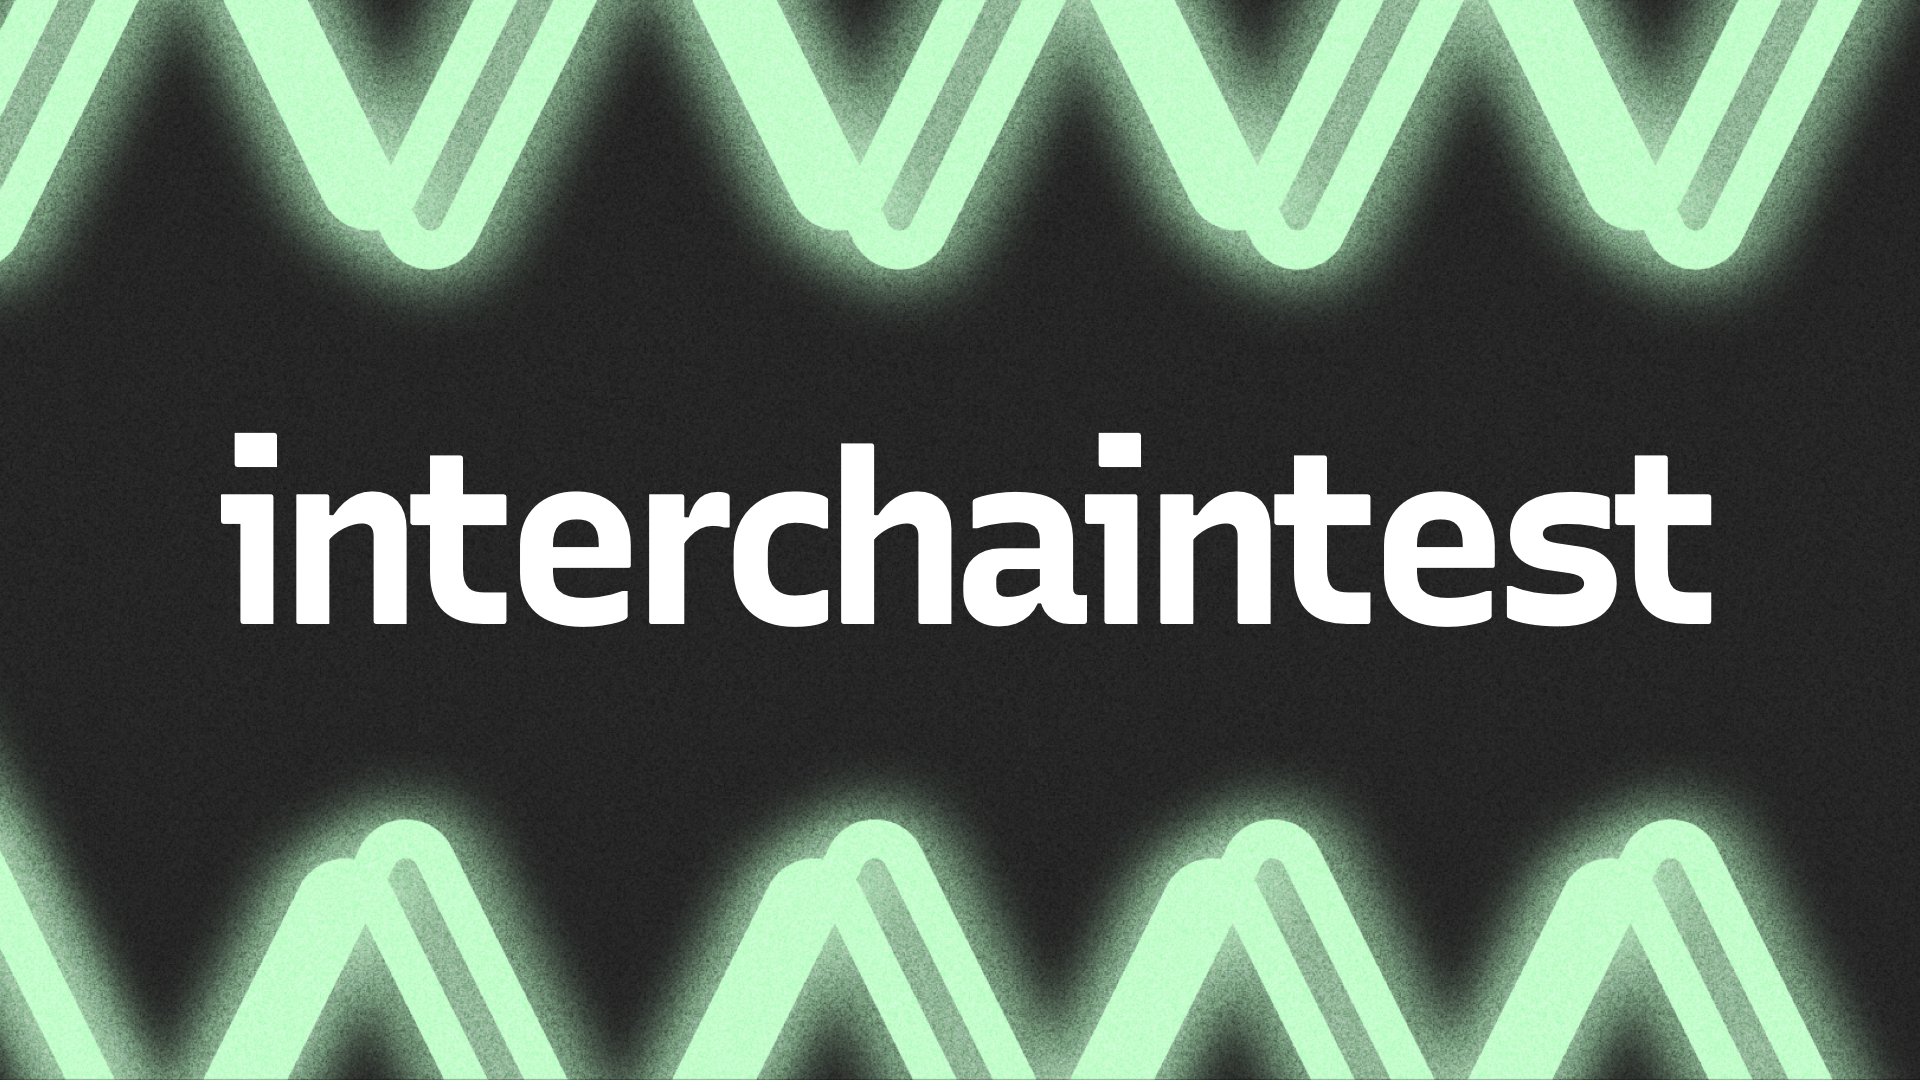 Interchaintest v8.1 Release Notes